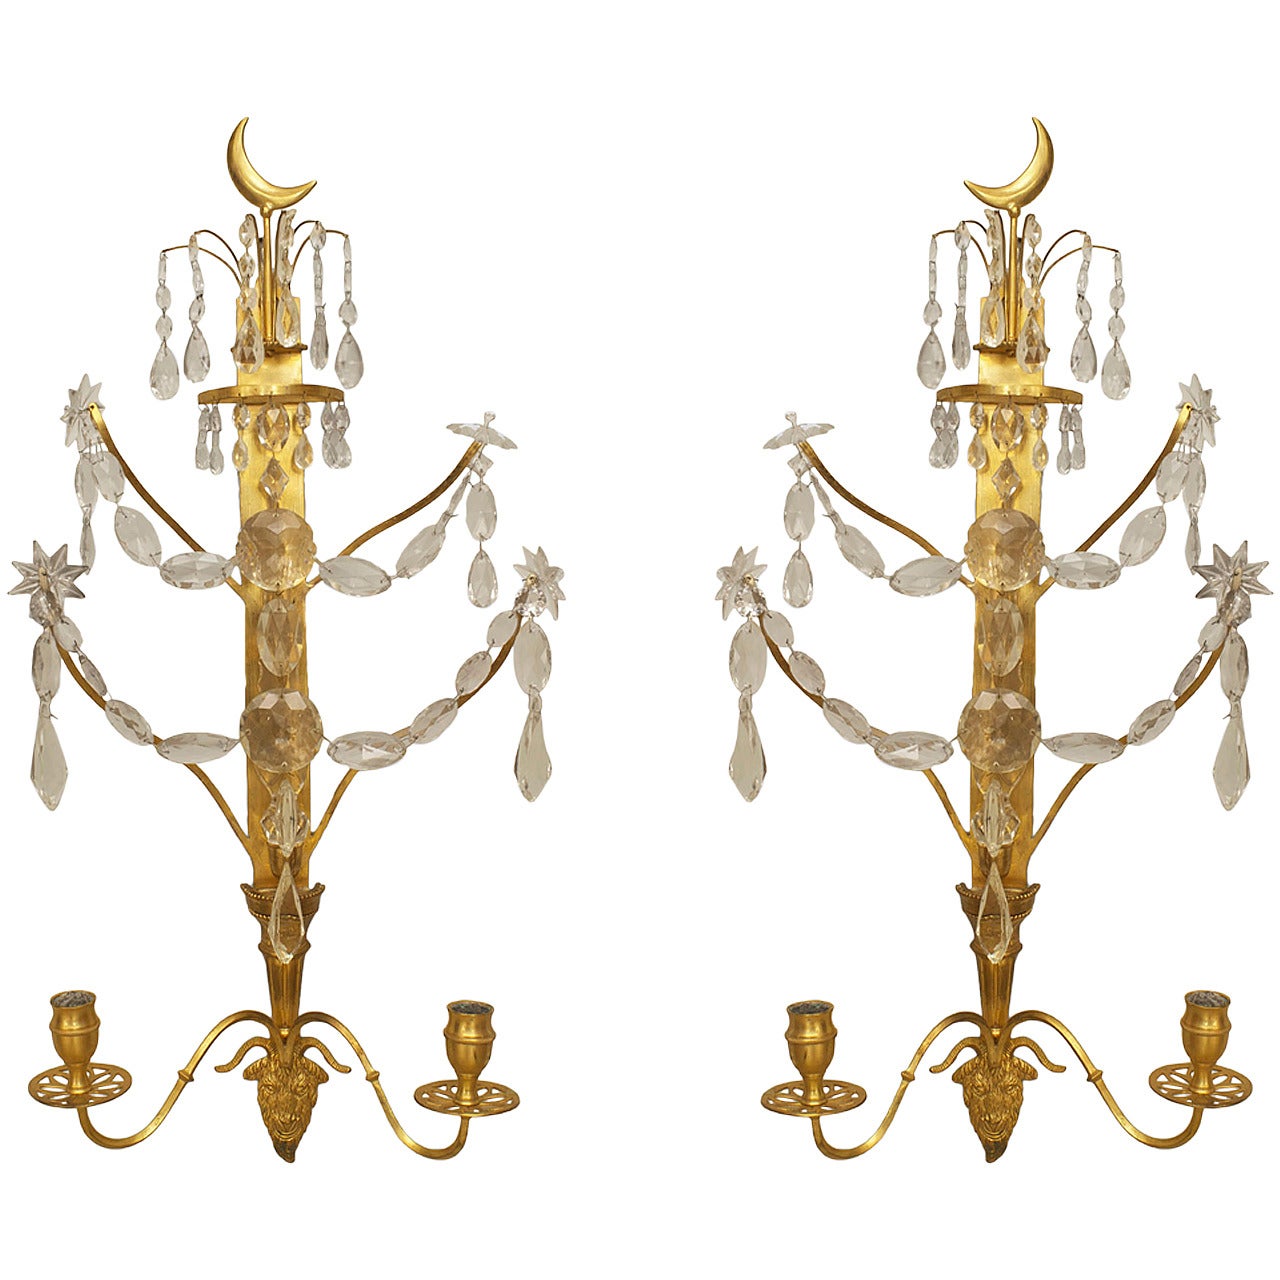 Pair of Continental Gilt Bronze Wall Sconces